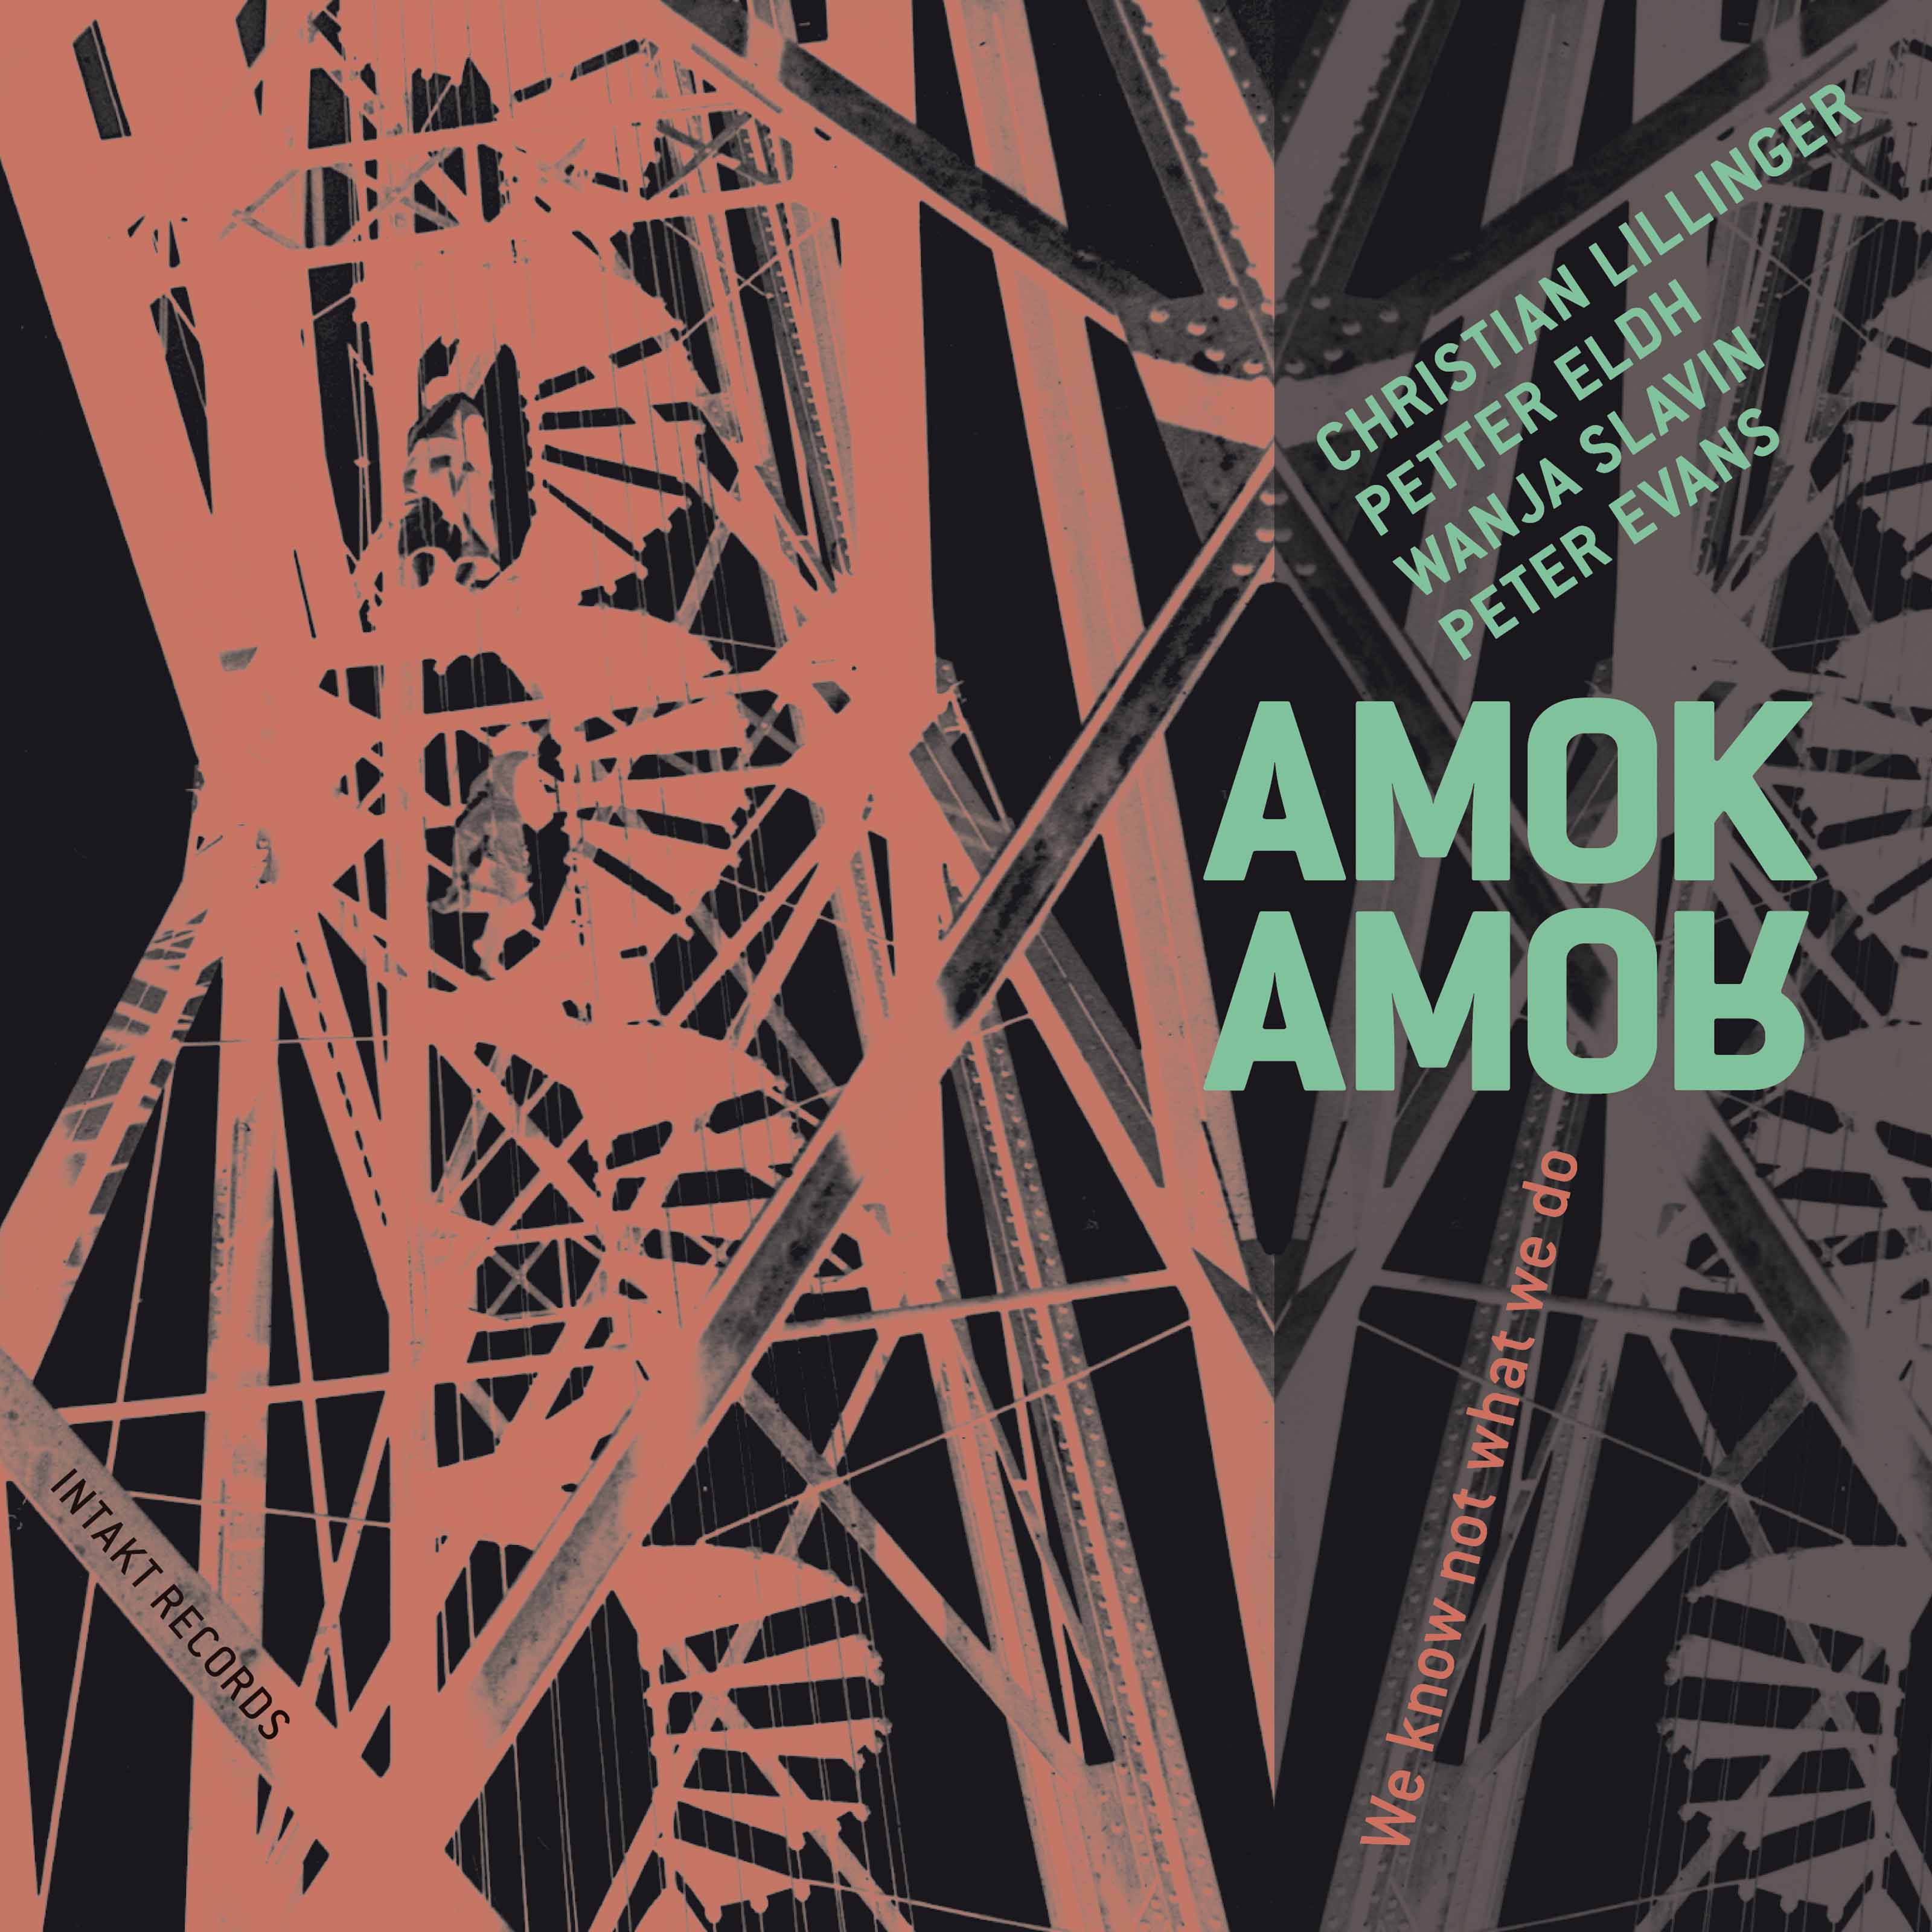 Amok Amor - We Know Not What We Do (2017) [HDTracks FLAC 24bit/44,1kHz]